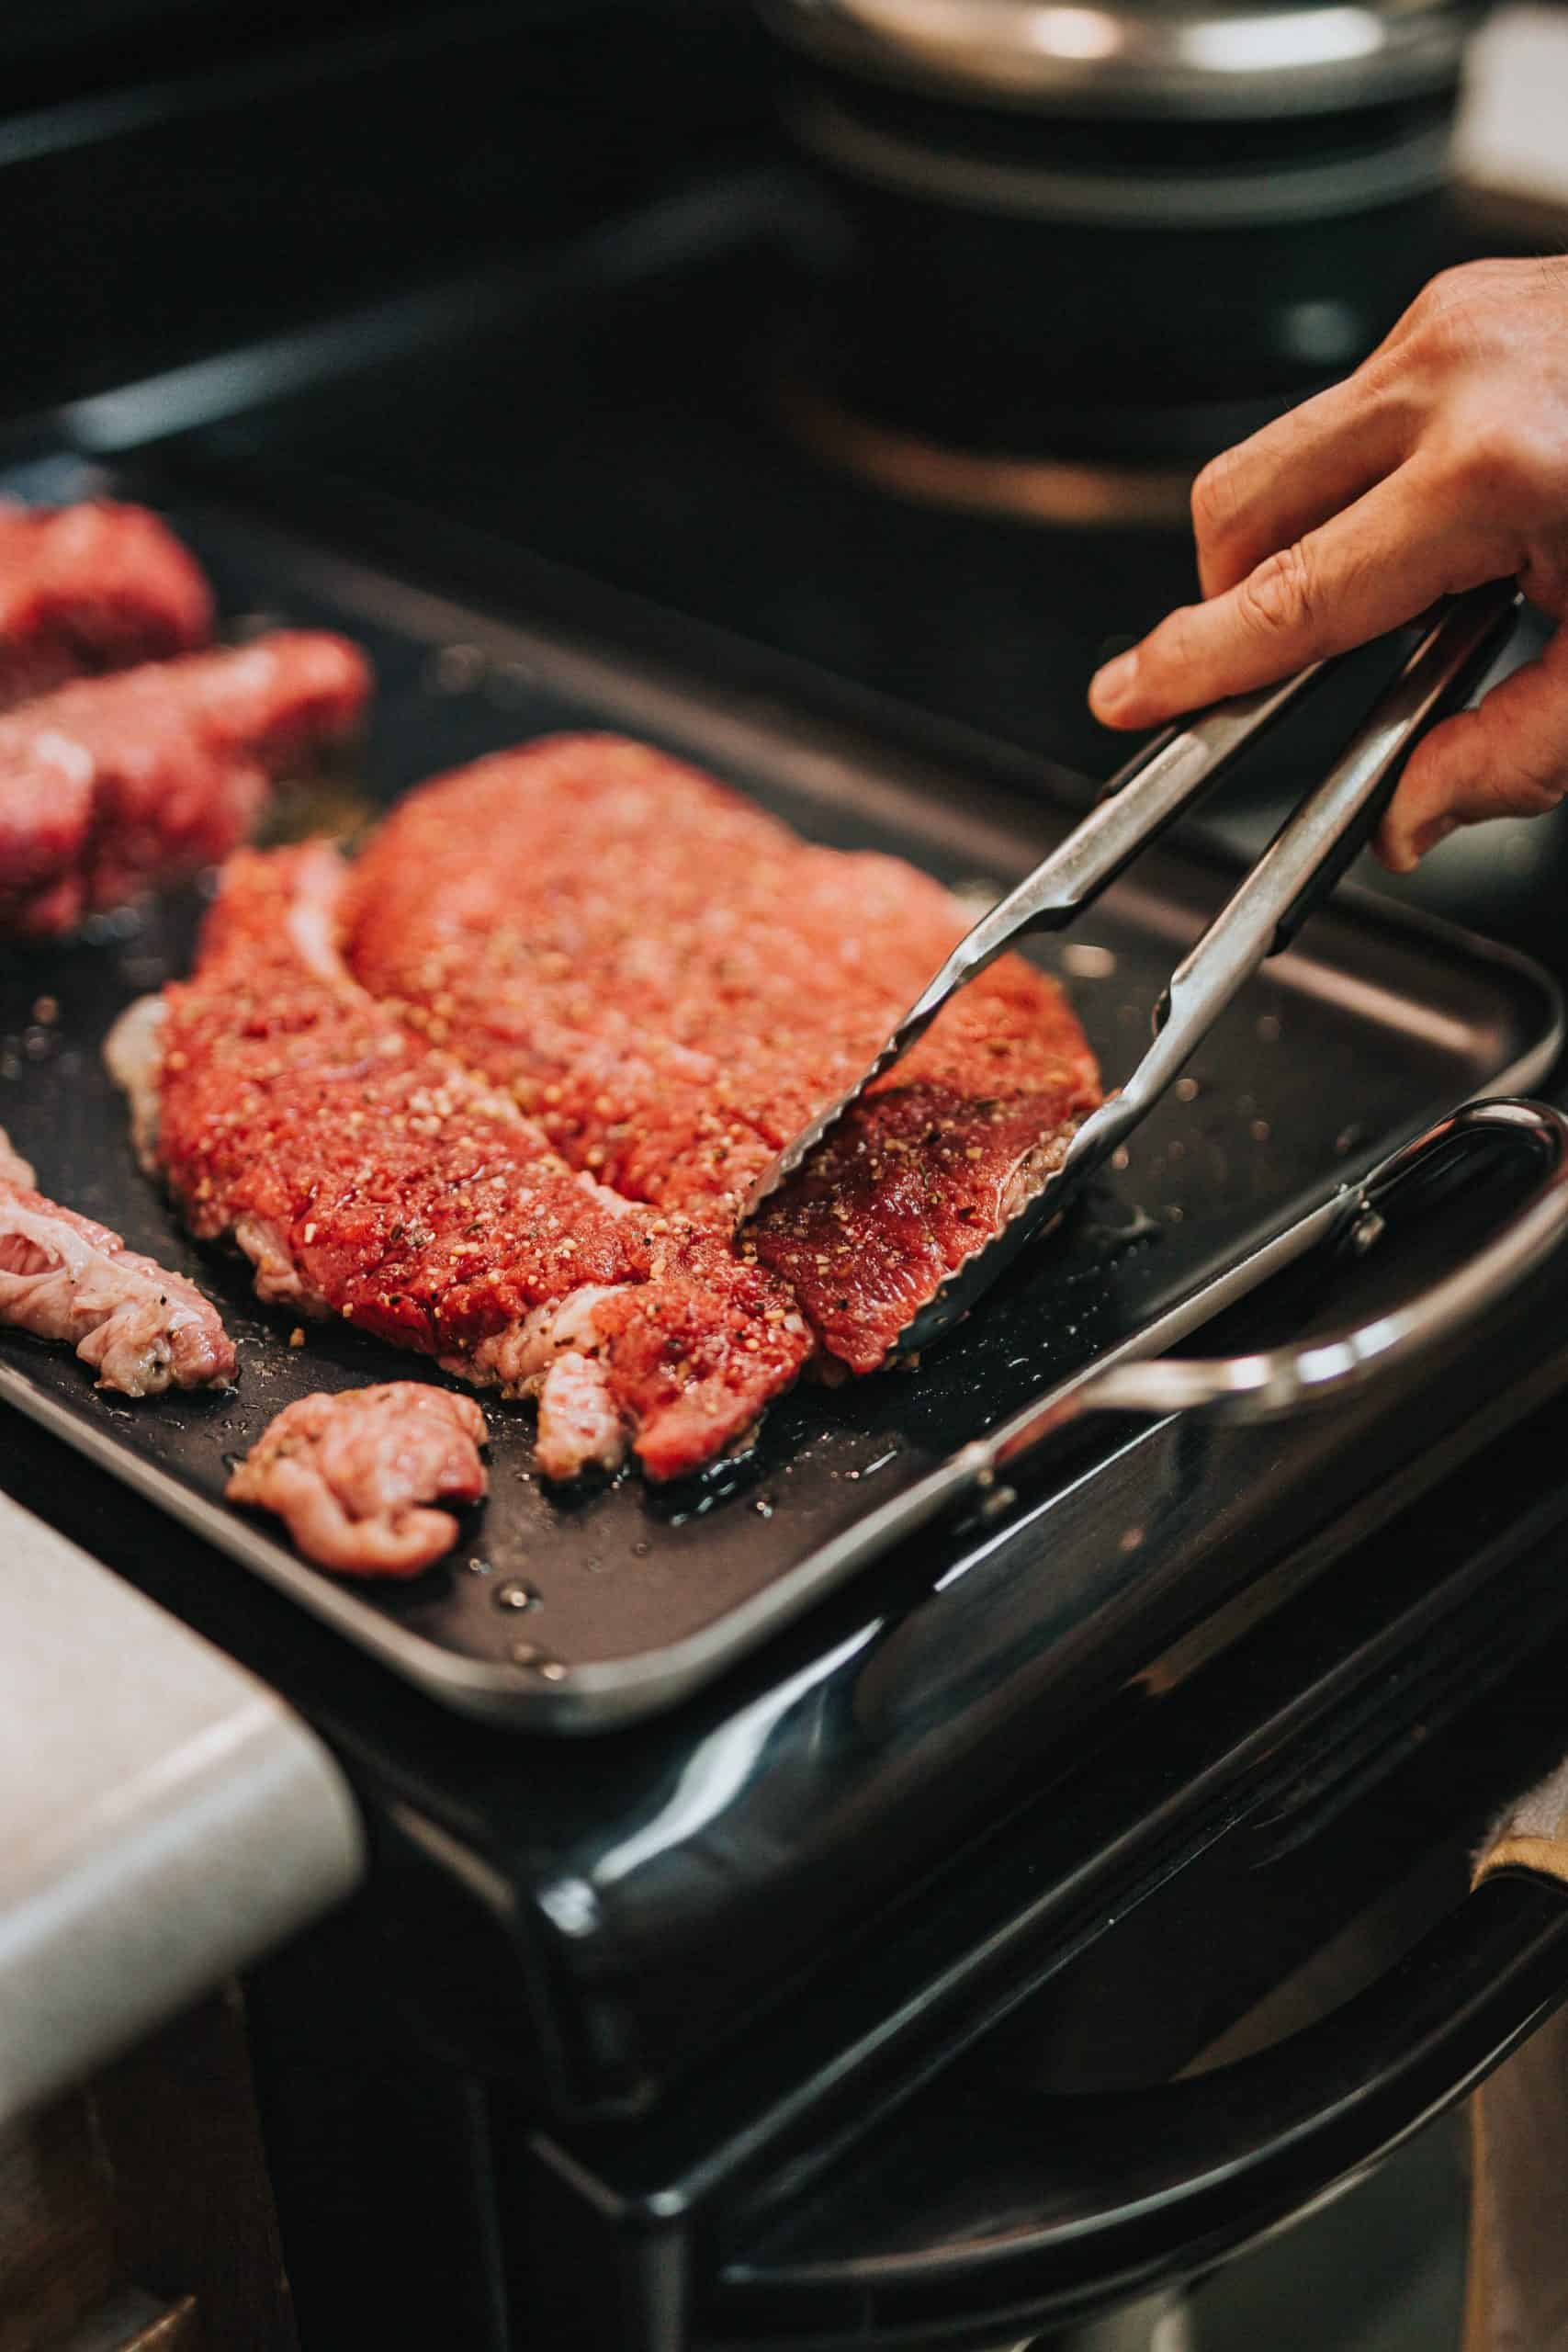 Nutrition Facts About Meat - Tips To Help You Choose Your Meats